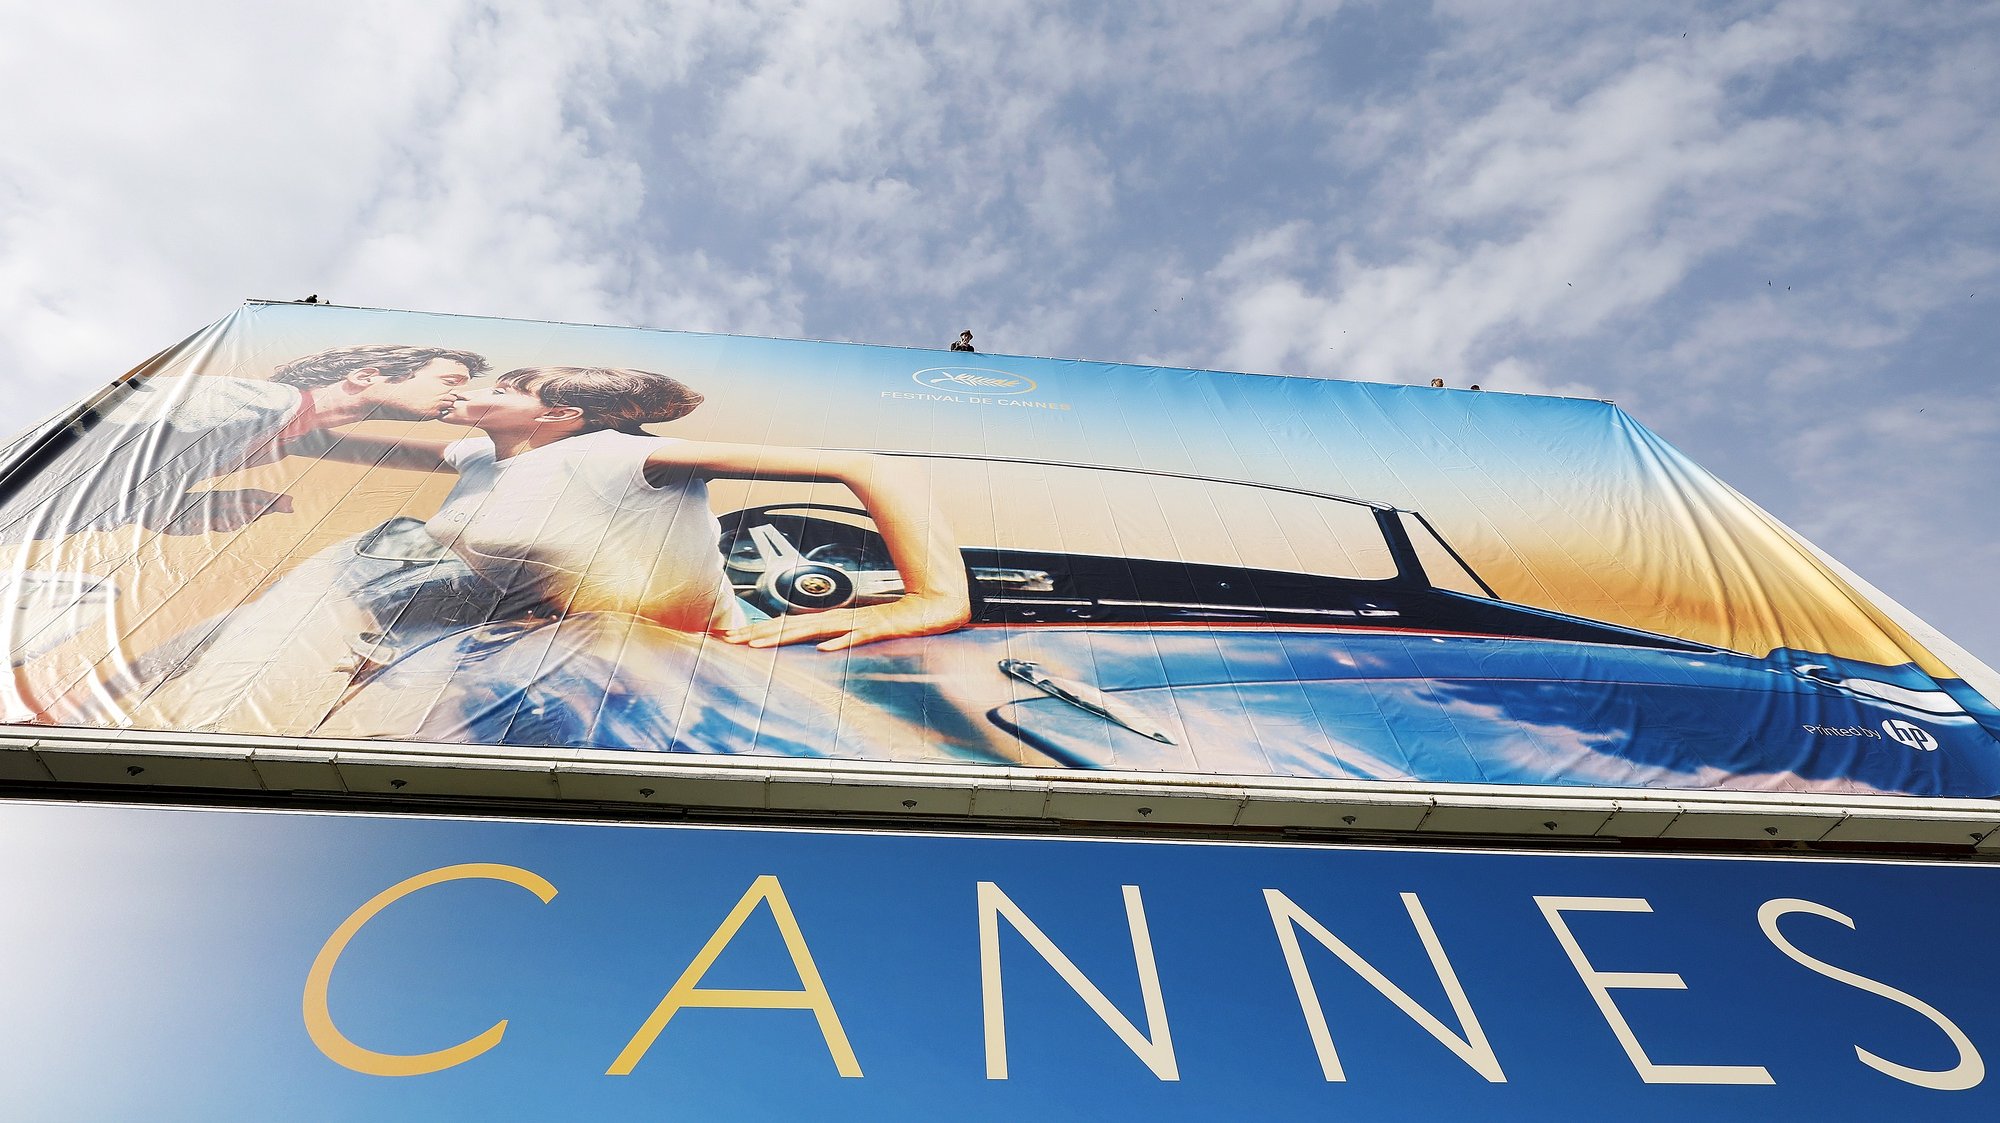 epa08307973 (FILE) - Workers set up the official poster of the 71st annual Cannes Film Festival on the Palais des Festivals facade, in Cannes, France, 06 May 2018 (reissued 19 March 2020). According to media reports, the Cannes Film Festival 2020 was cancelled, organizers announced on 19 March 2020, over the spread of the SARS-CoV-2 coronavirus causing the Covid-19 disease. The 73rd annual Cannes International Film Festival was due to take place from 12 to 23 May 2020.  EPA/SEBASTIEN NOGIER *** Local Caption *** 54311424